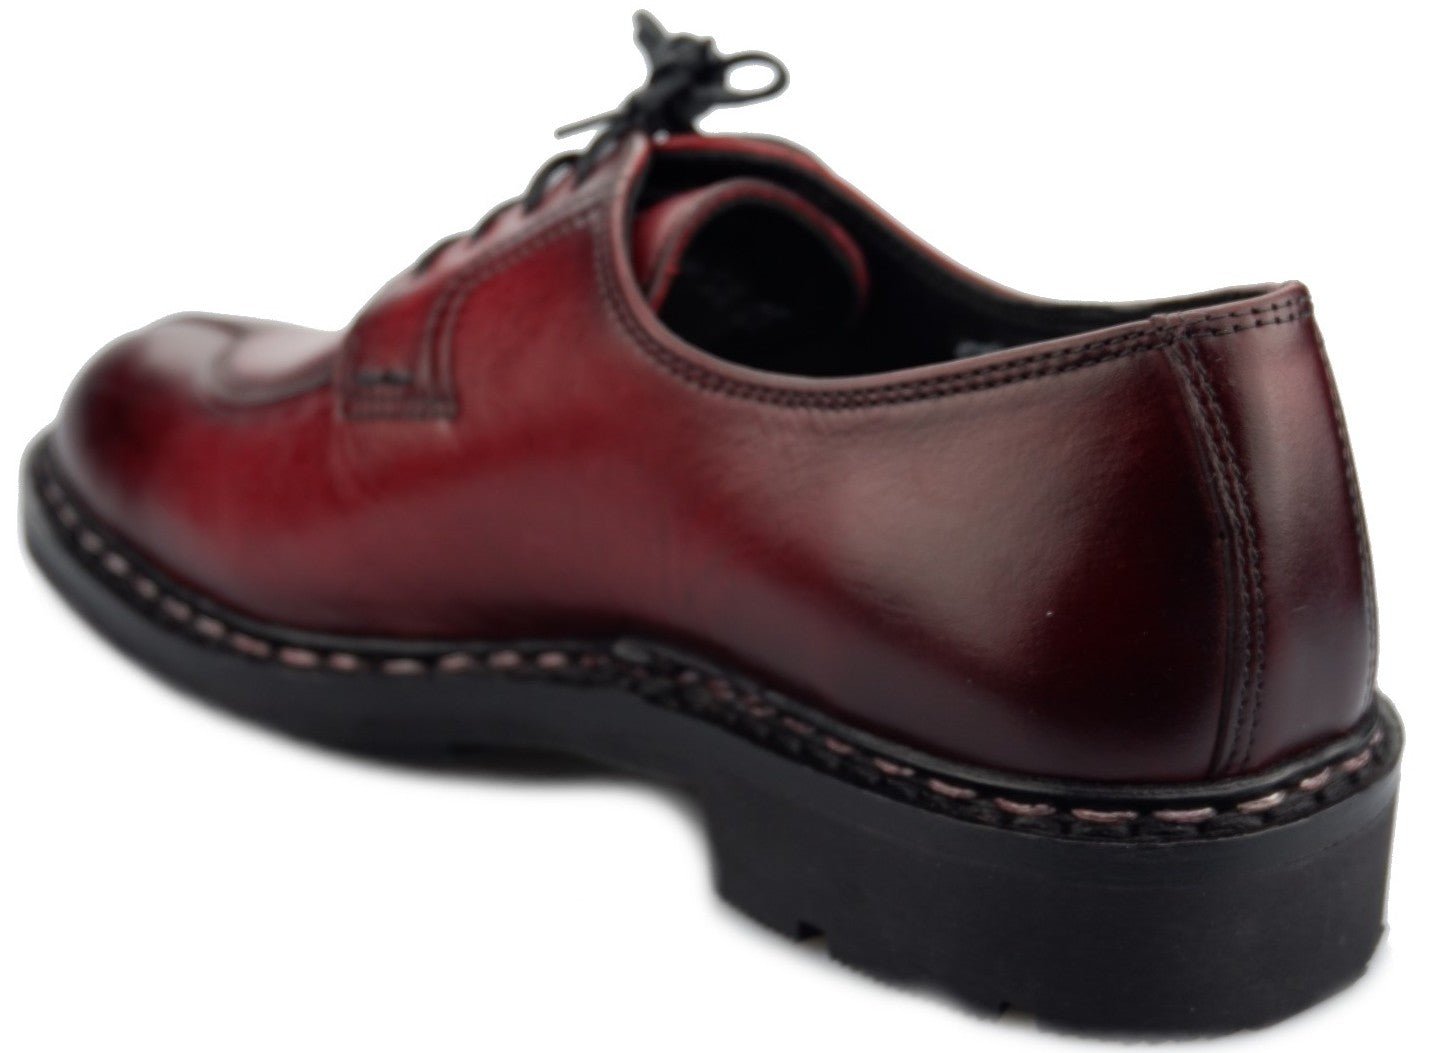 Mephisto SANDRO HERITAGE oxblood red leather GOODYEAR WELT made shoe for men - ChaplinshoesMephisto SANDRO HERITAGE oxblood red leather GOODYEAR WELT made shoe for menMephisto